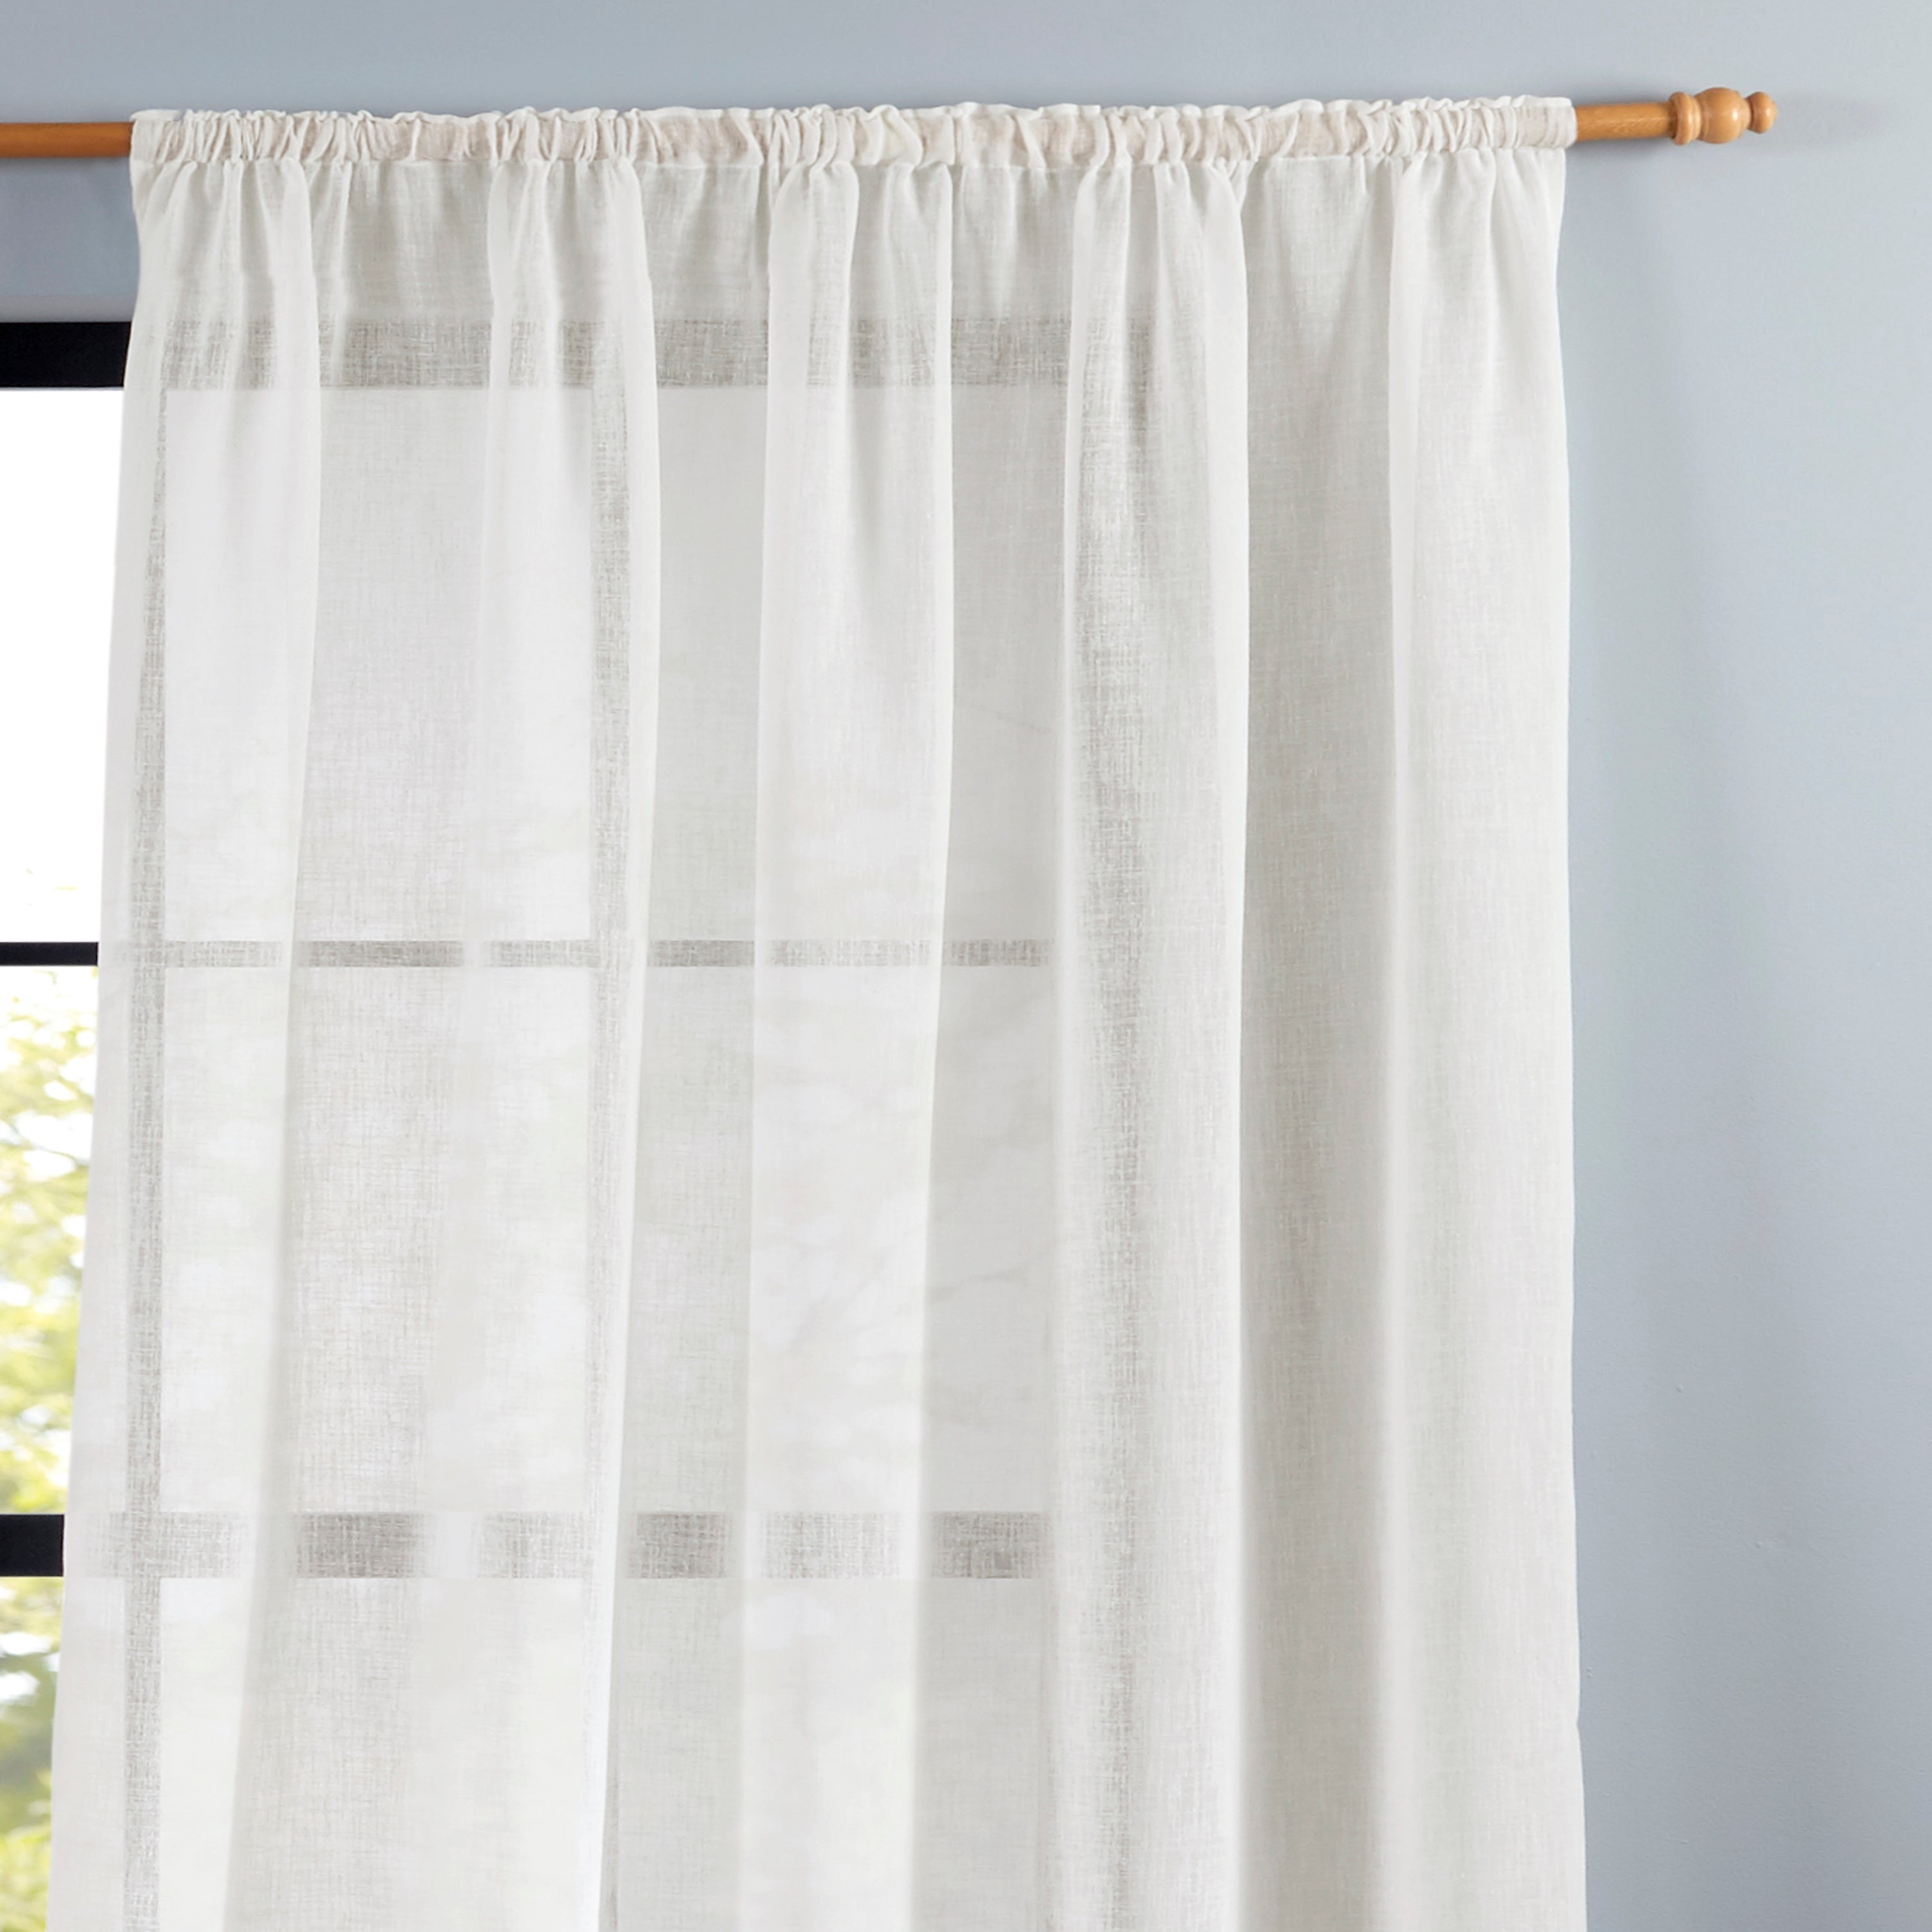 Voile & Net Curtains - Browse Our Full Range | Dunelm